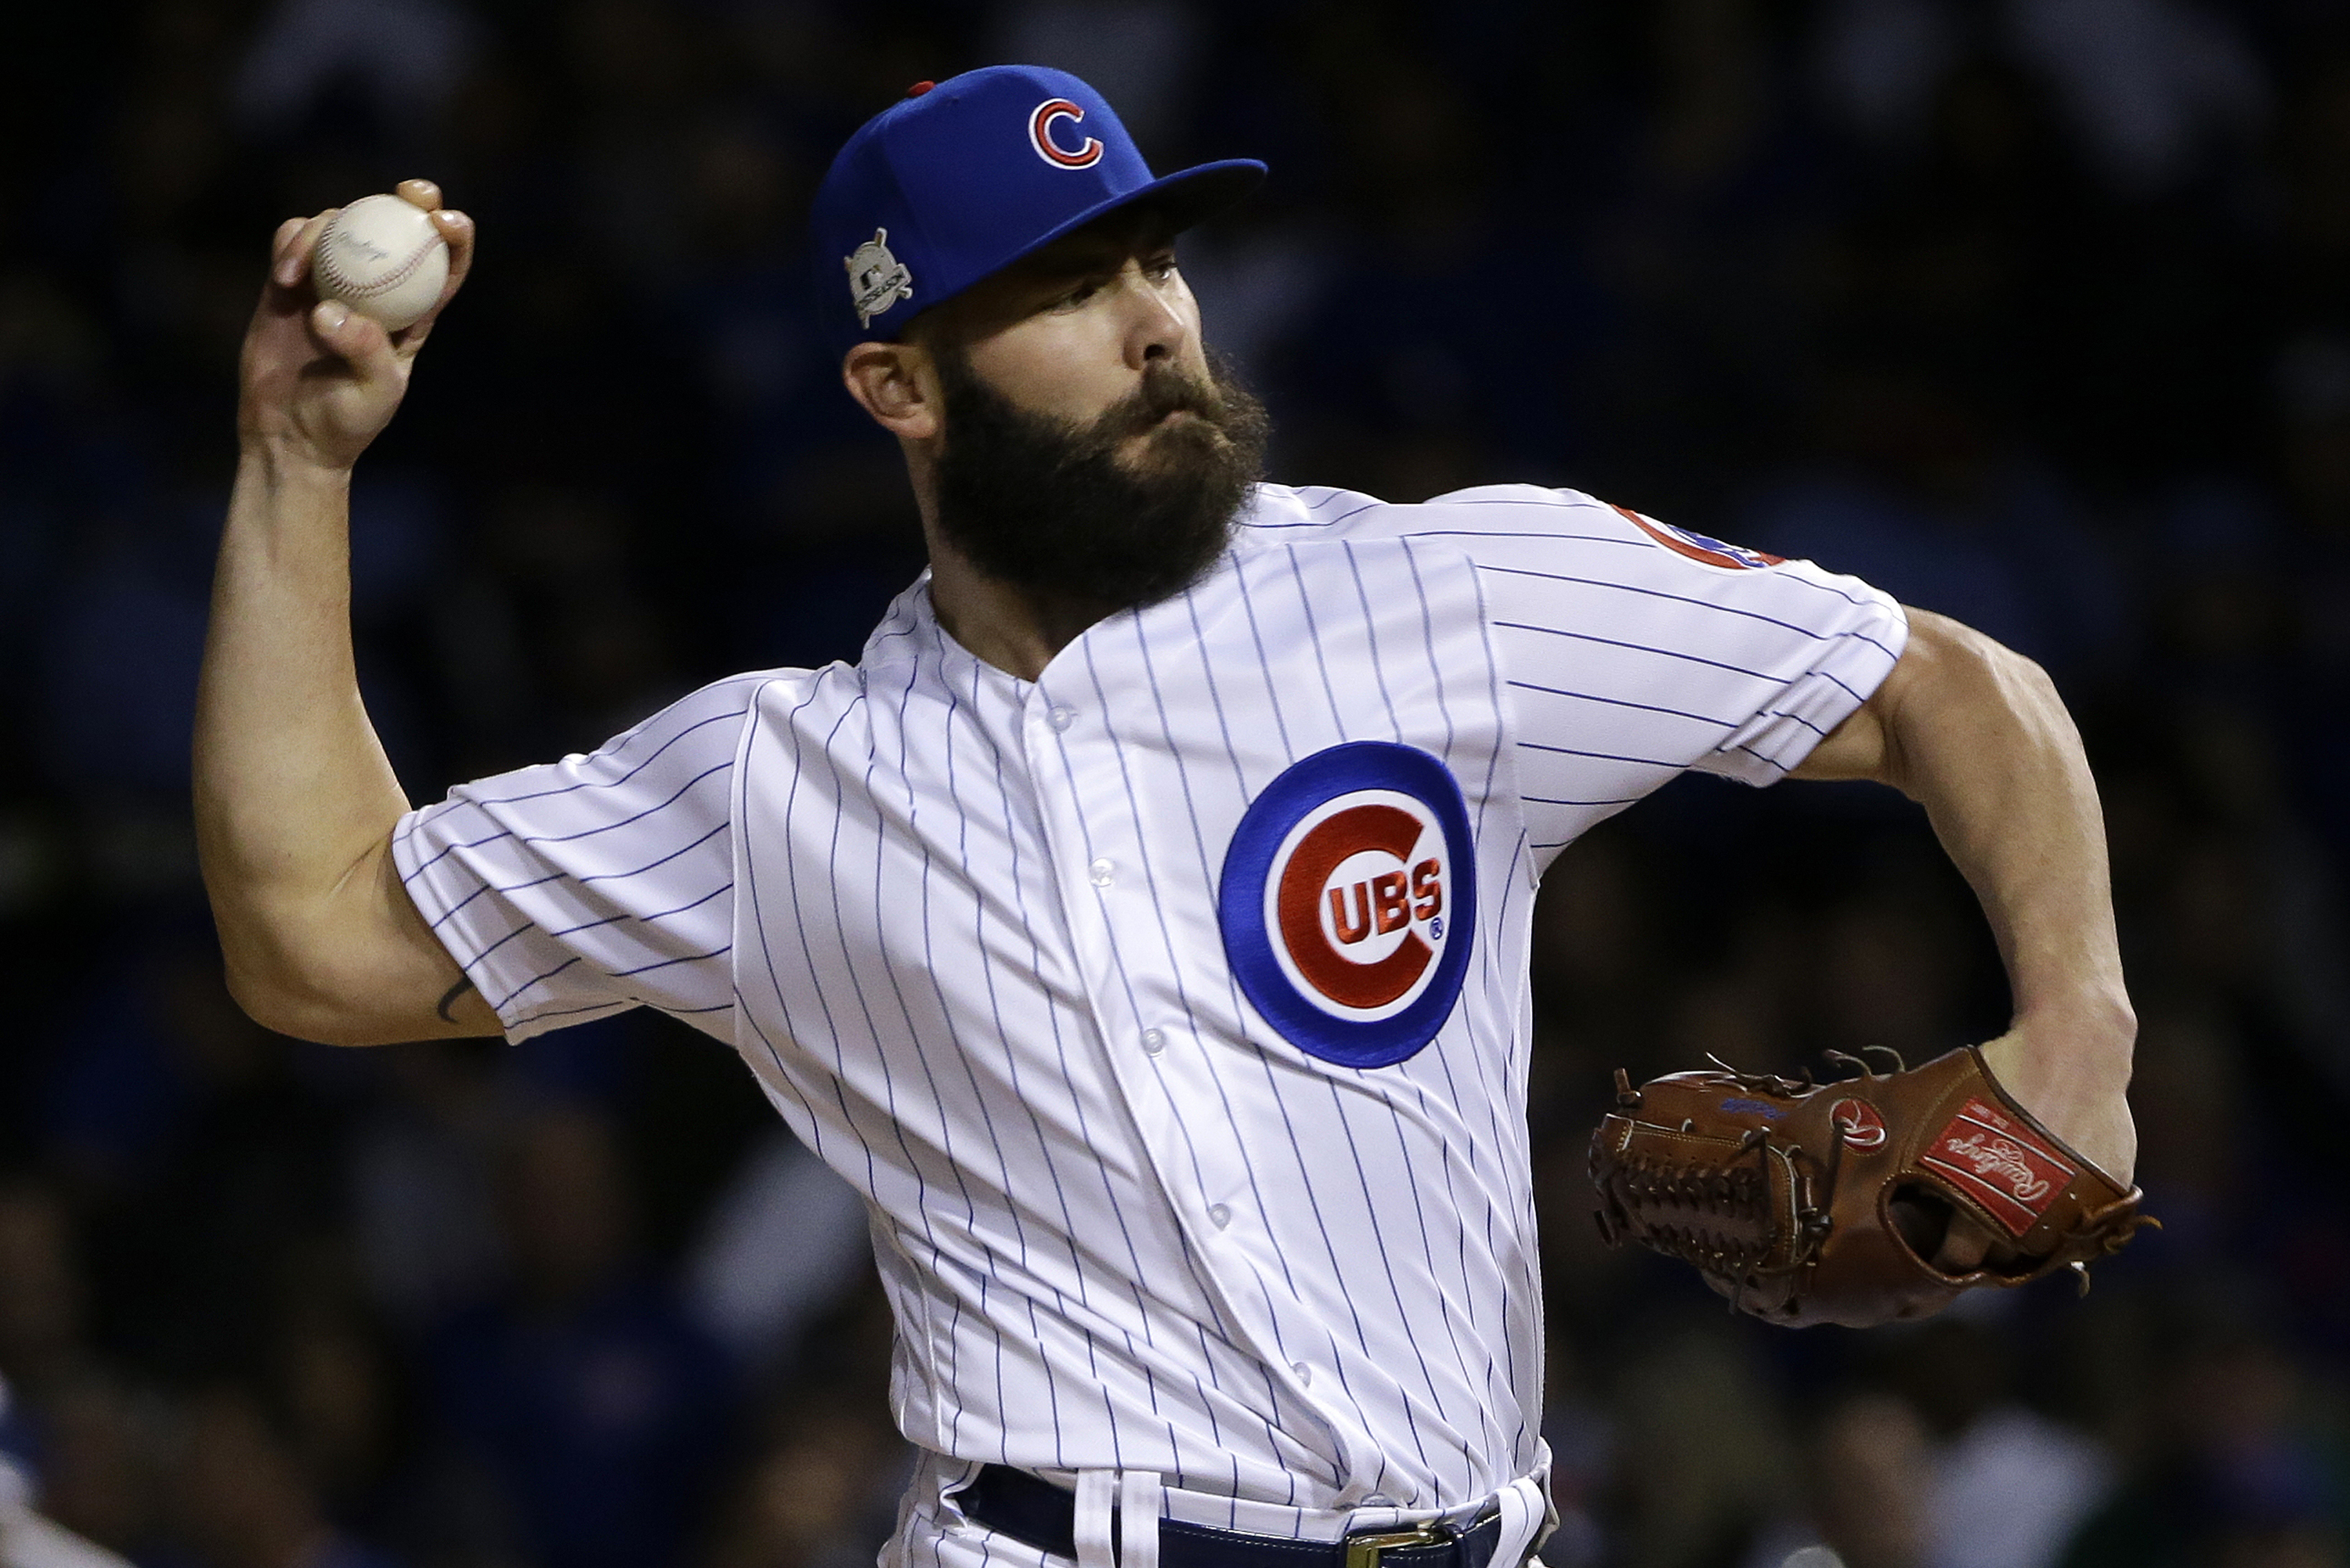 Cubs: Jake Arrieta reuniting with Chicago in his free agency